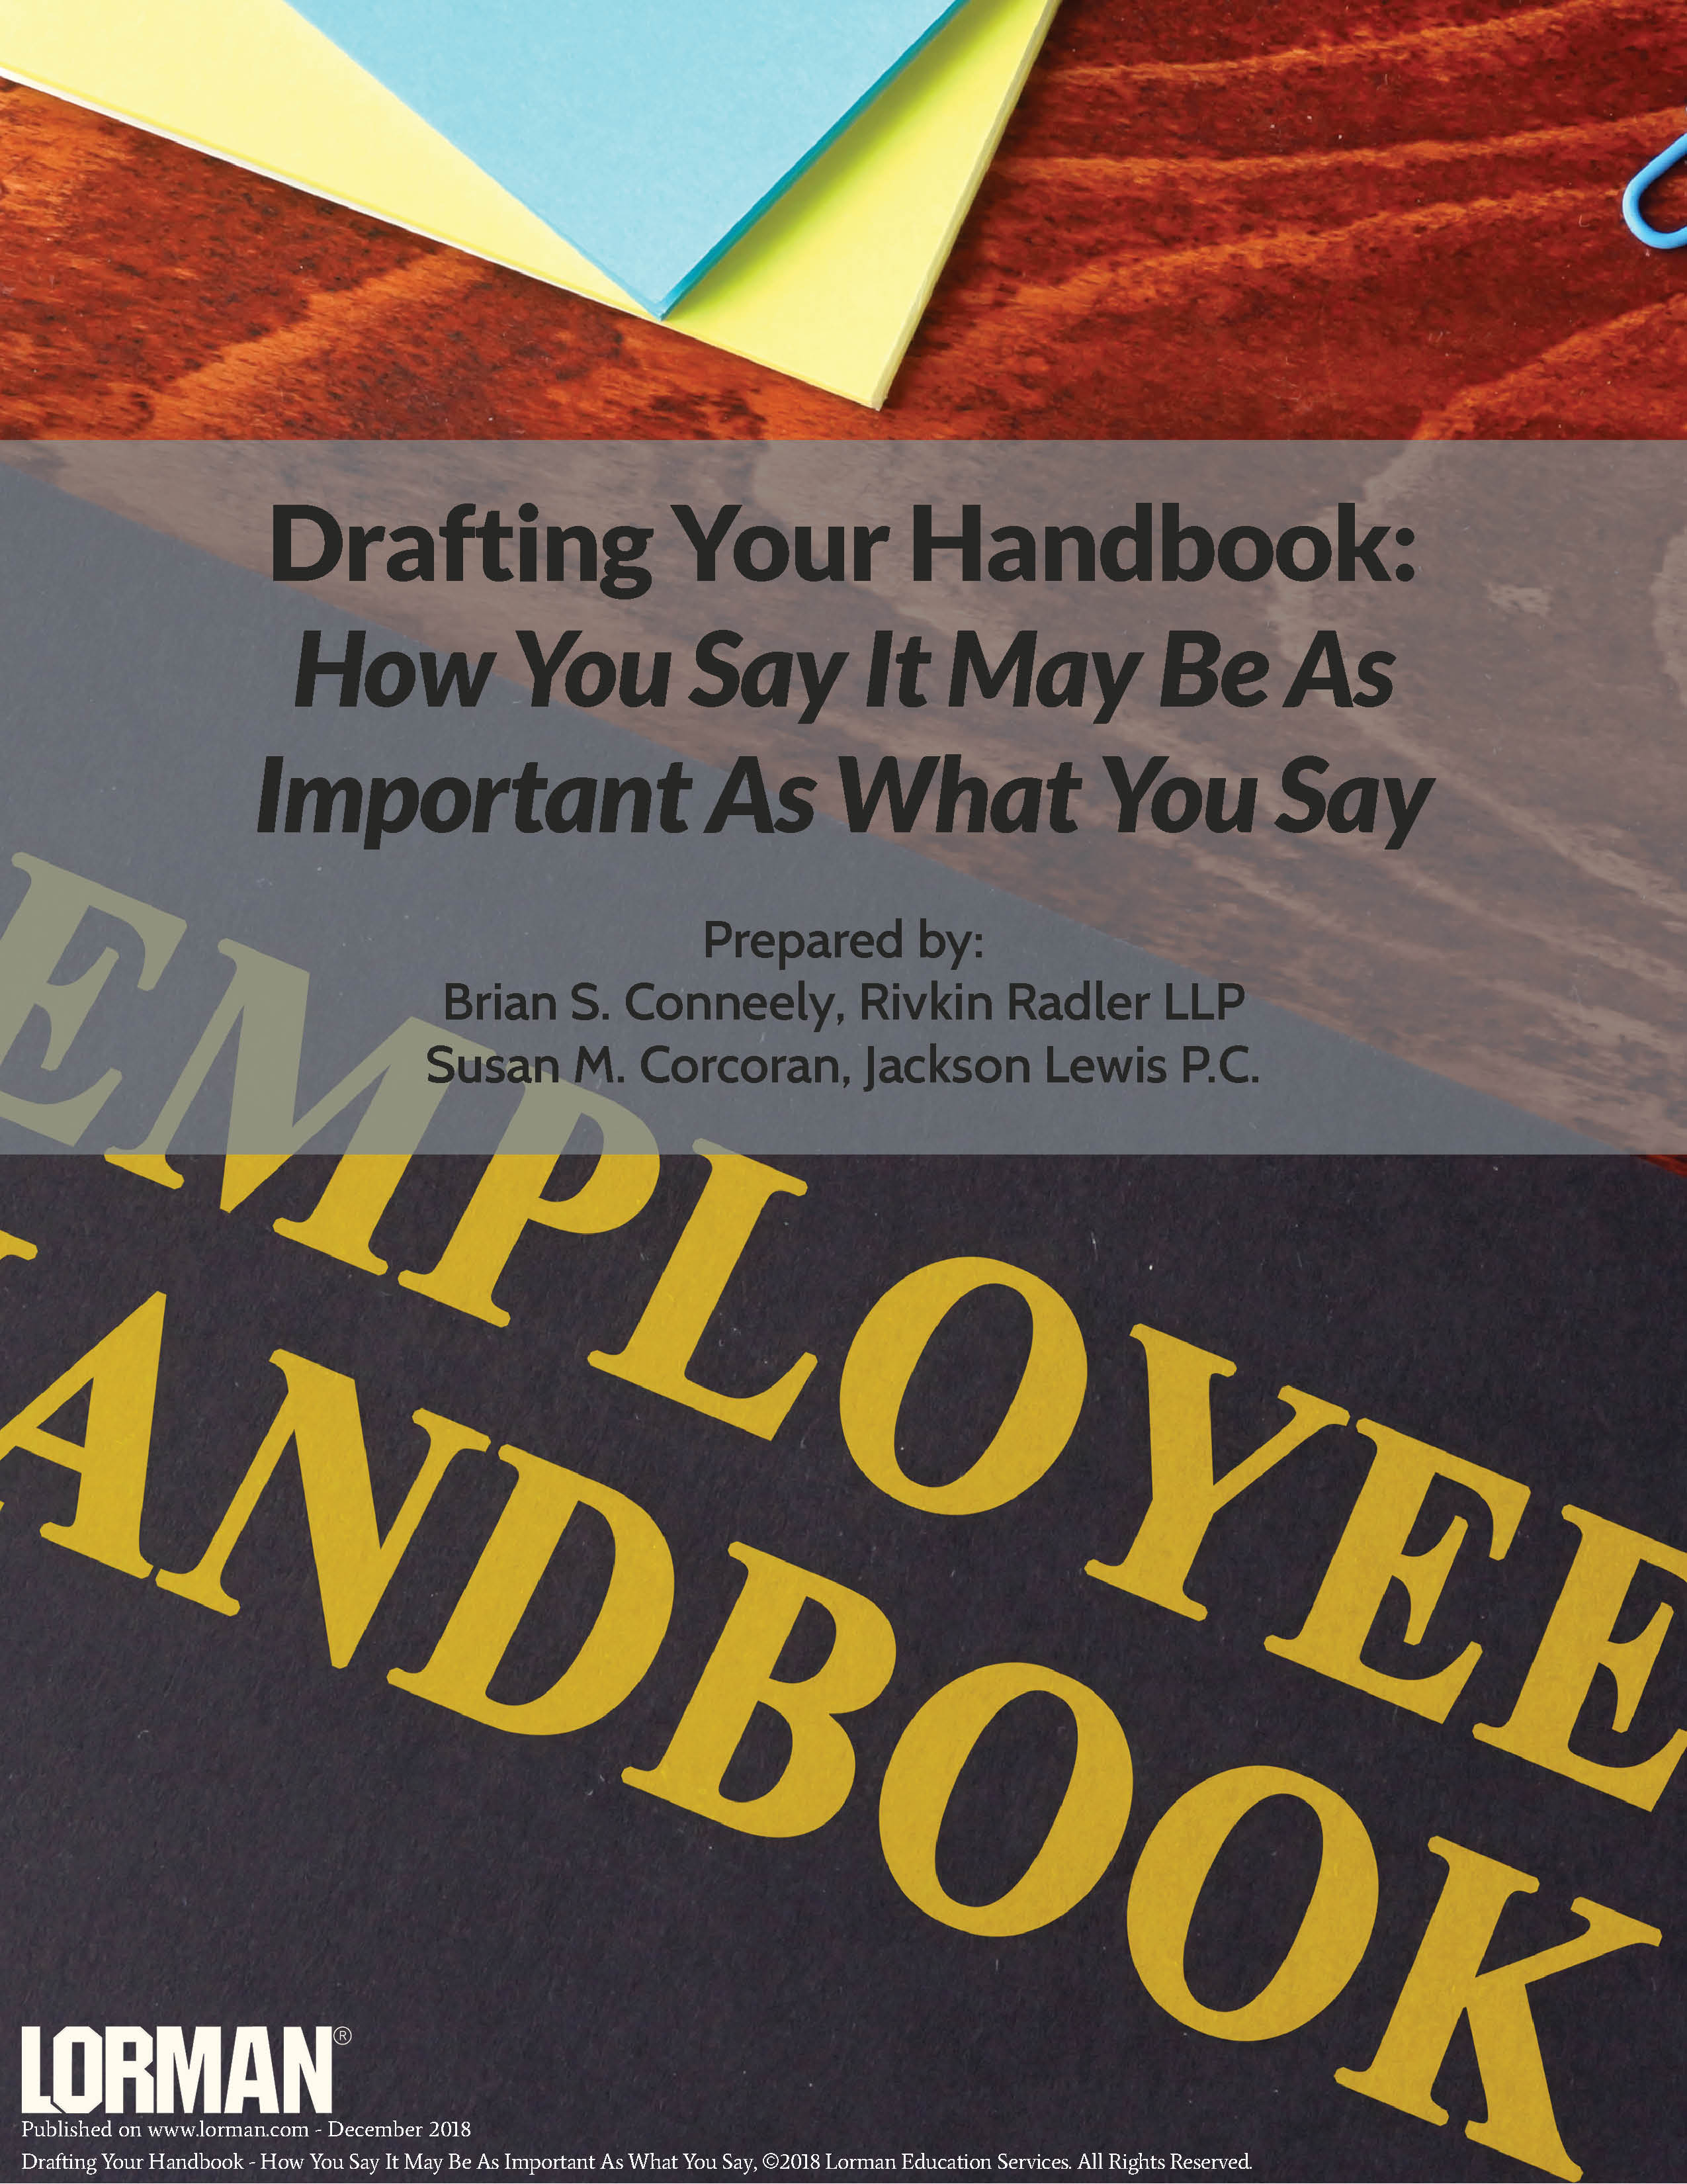 Drafting Your Handbook - How You Say It May Be As Important As What You Say